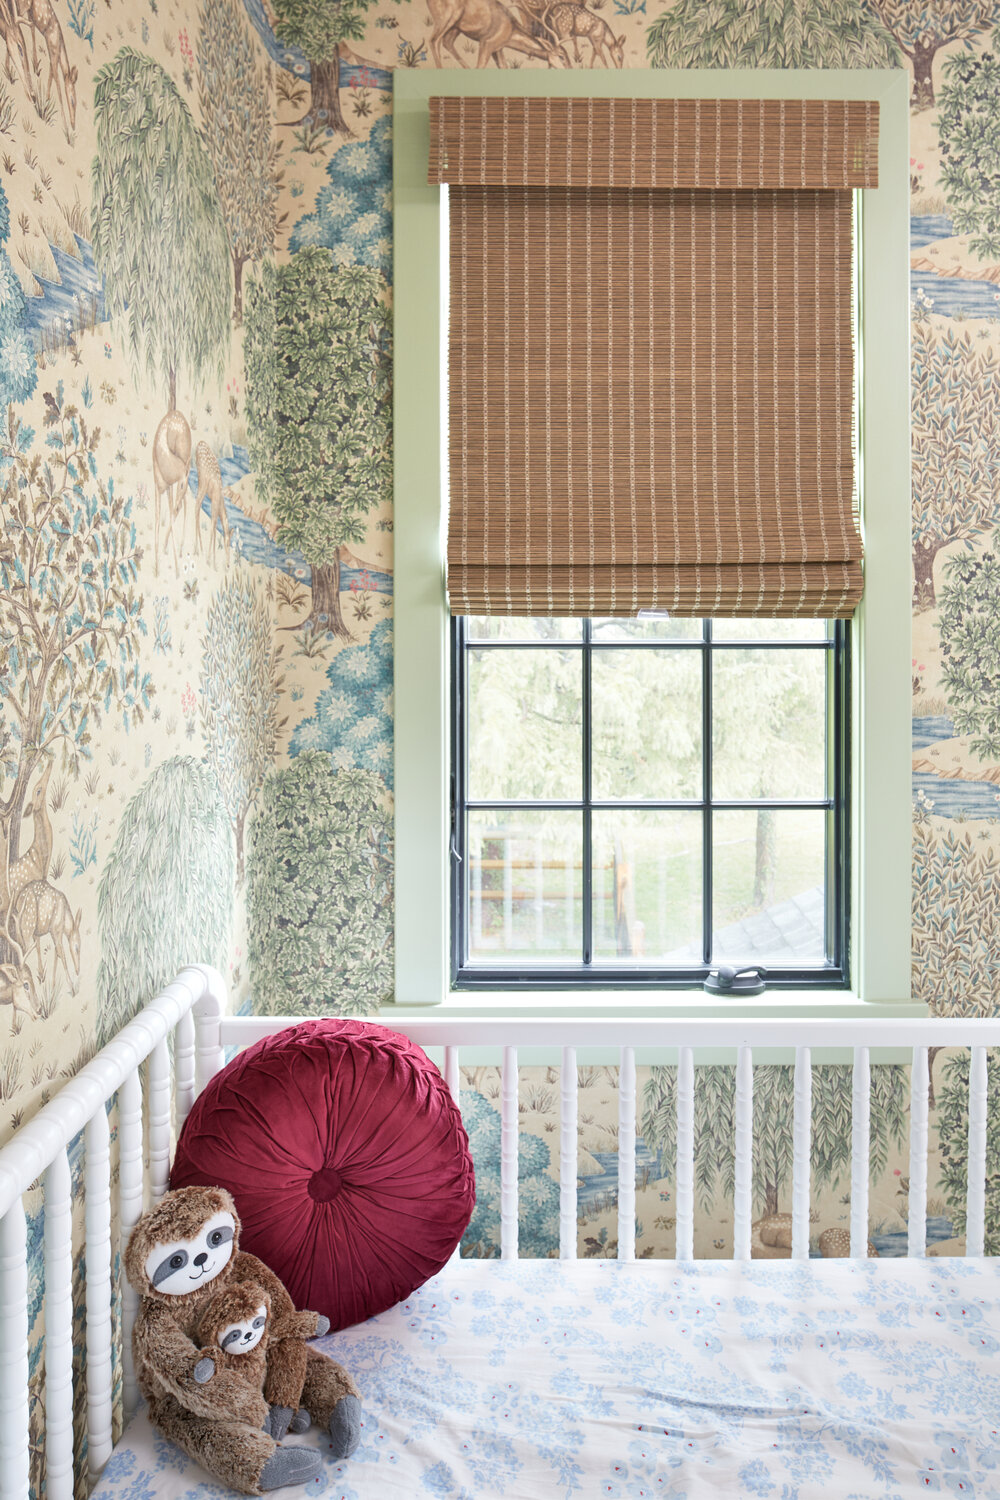 Woodland wallpaper in nursery with green painted trim by Michelle Gage.jpg